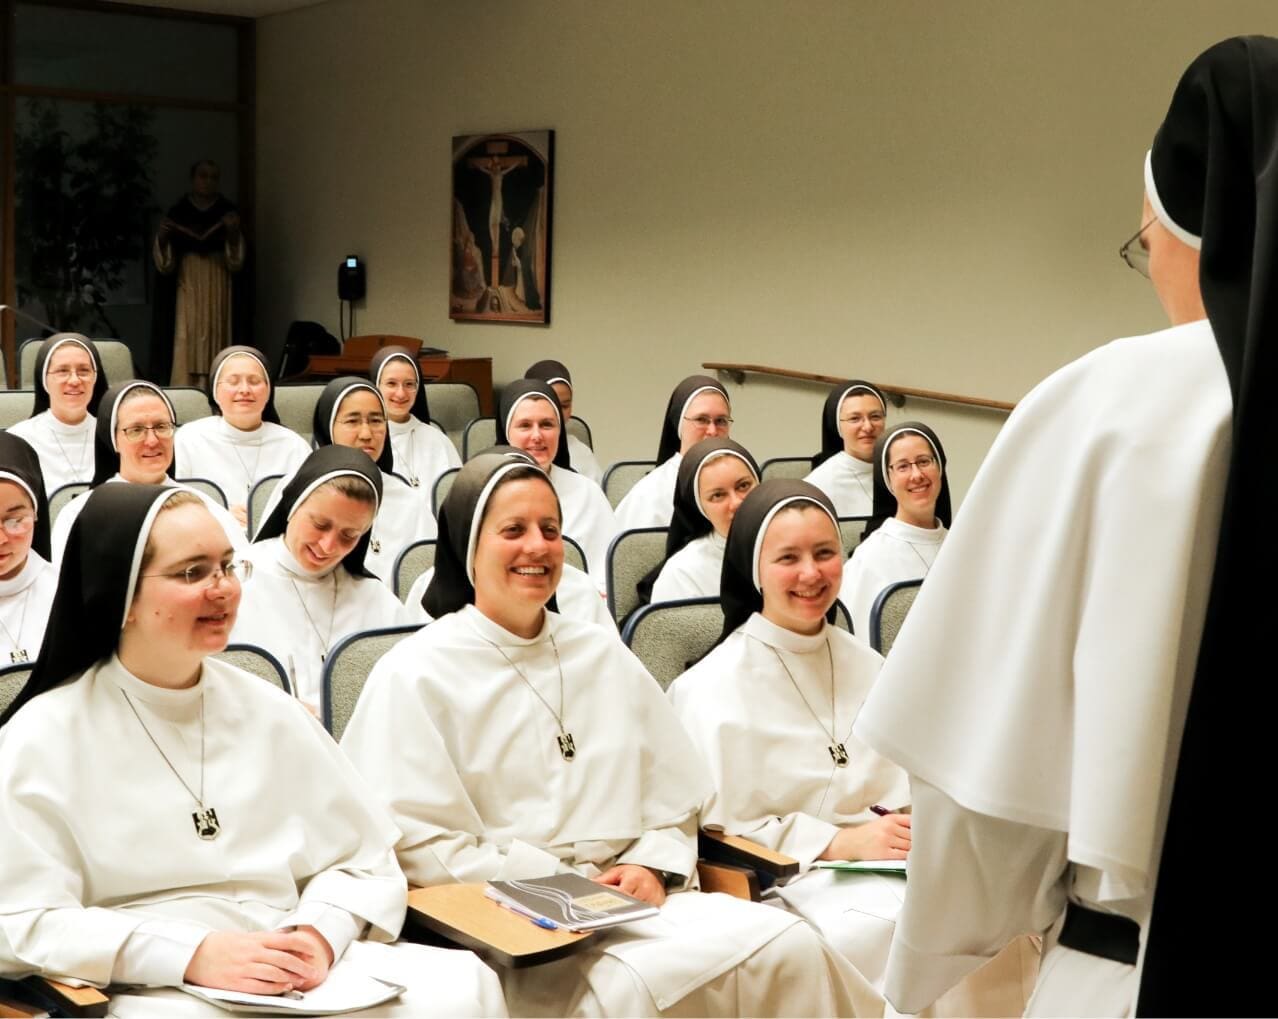 dominican sisters catholic religious vocations women prayer faith Formation Temporary Profession New